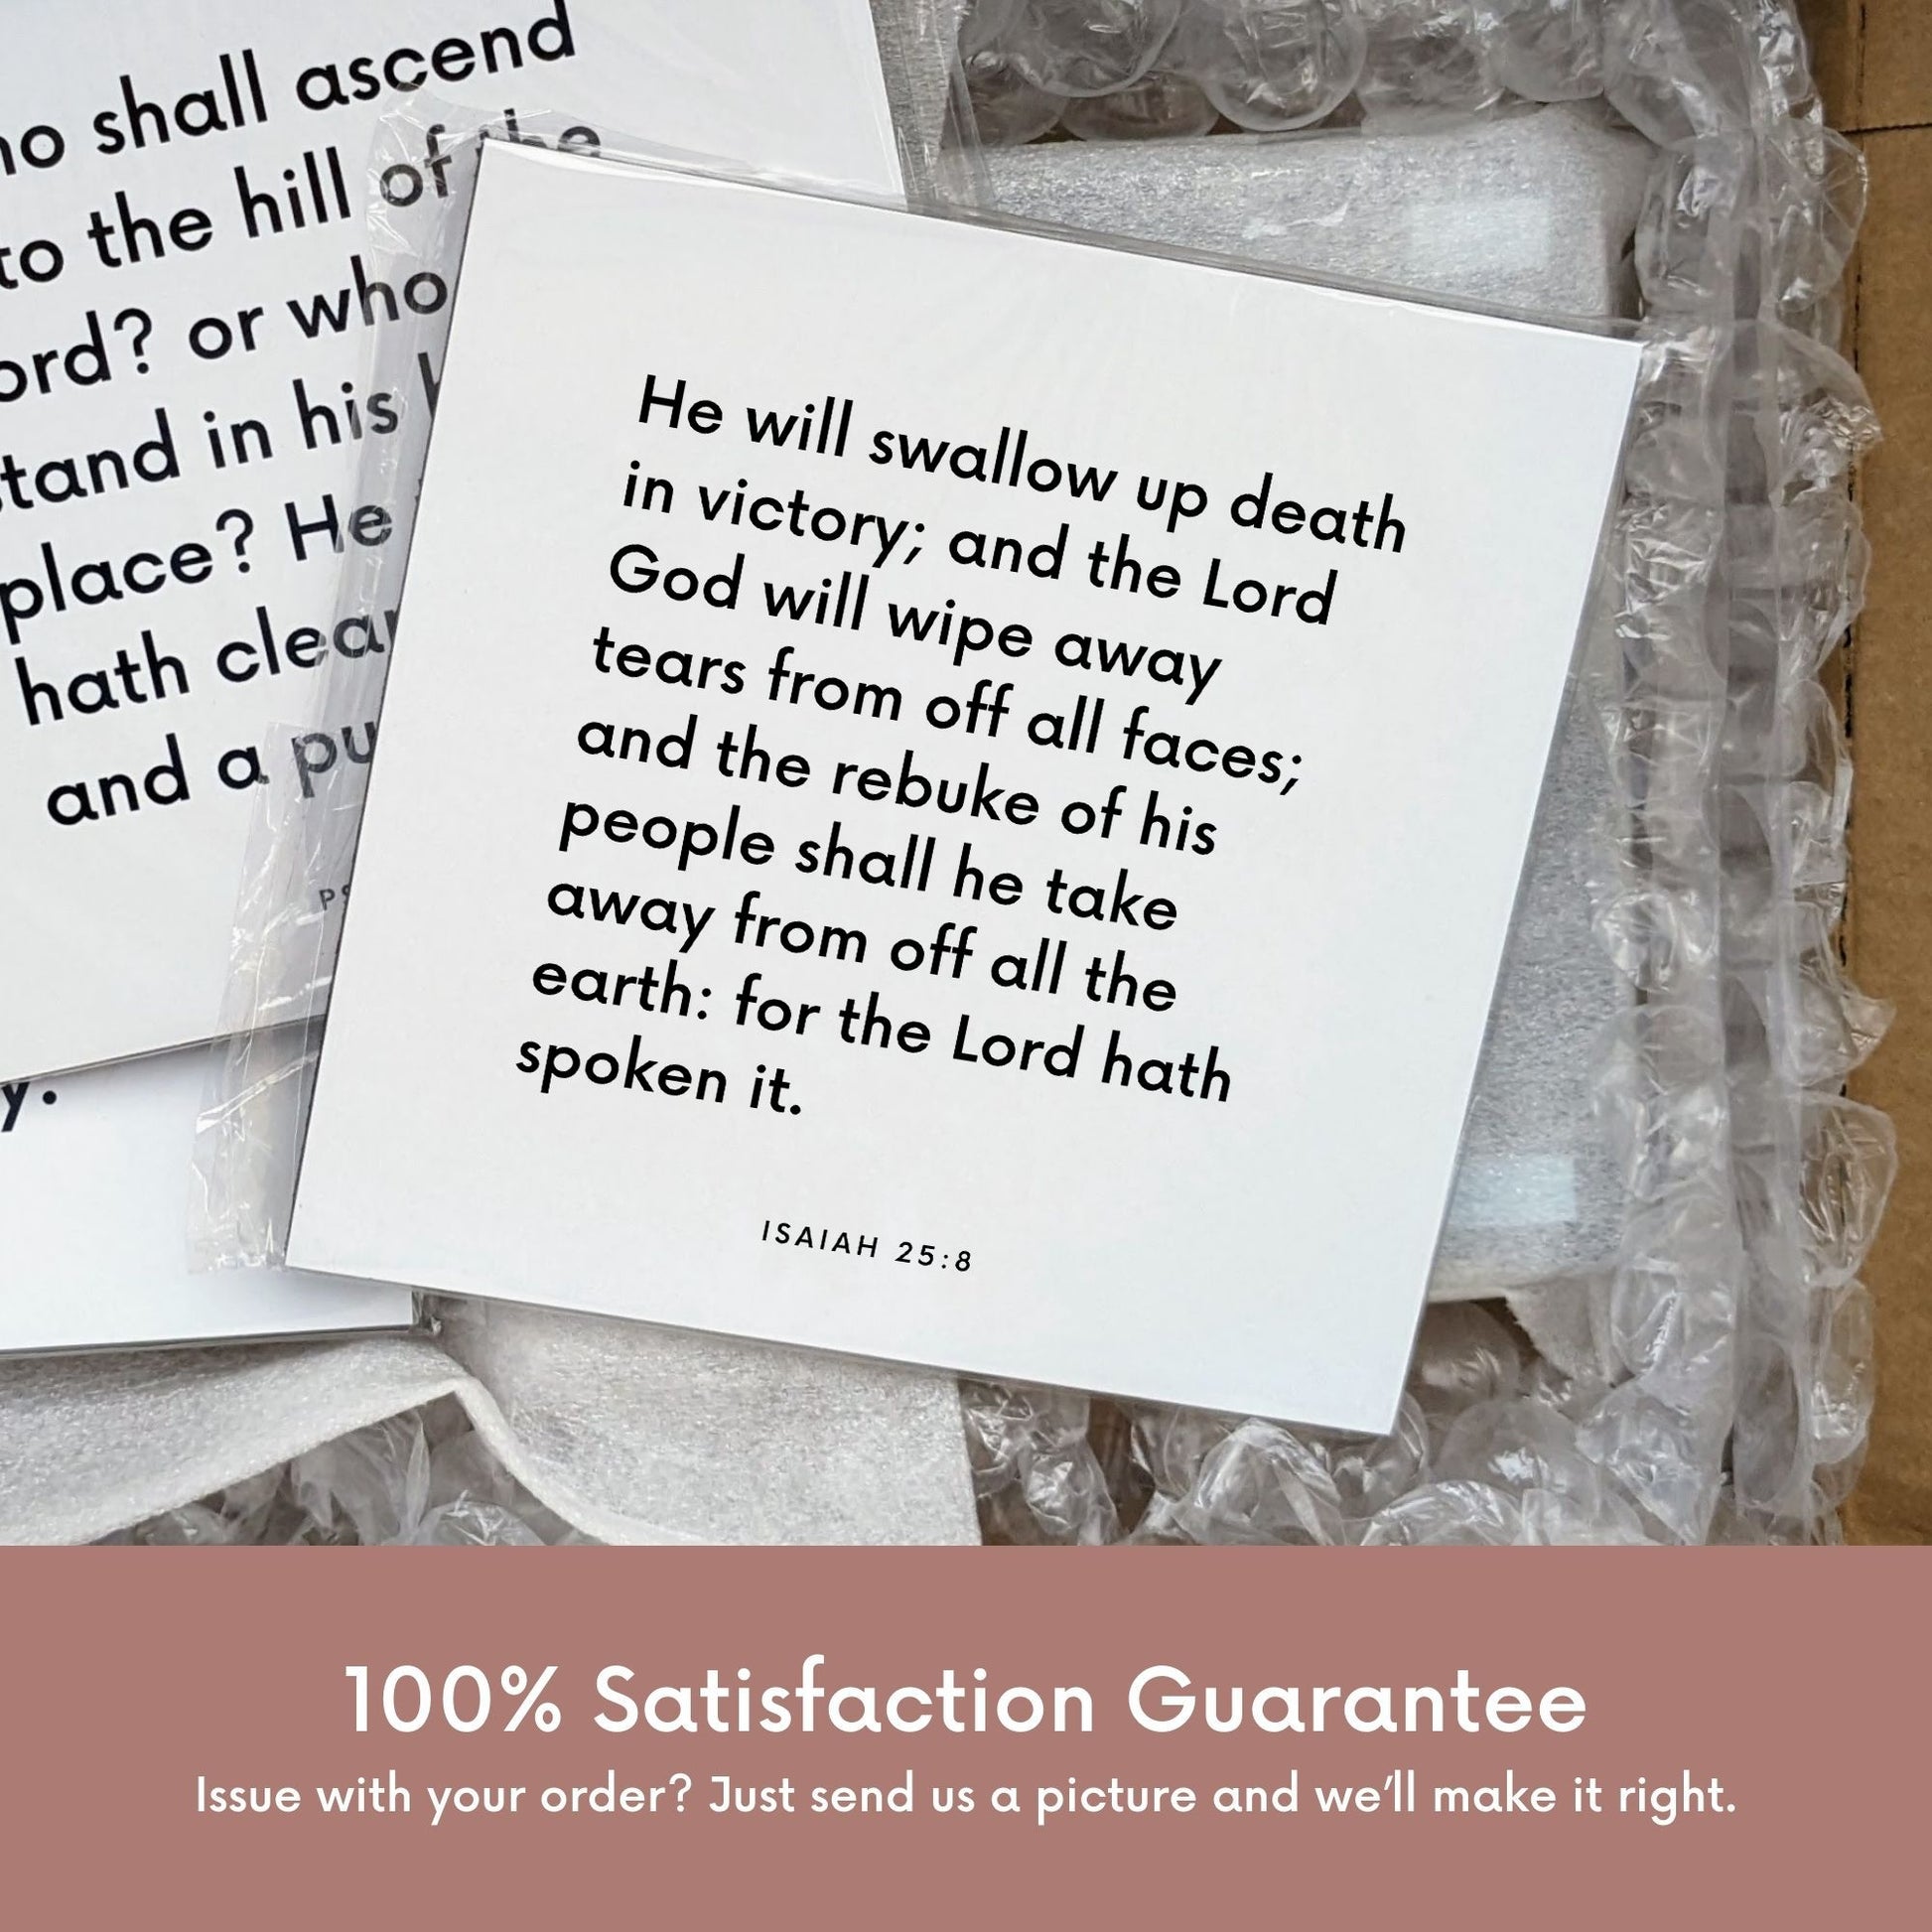 Shipping materials for scripture tile of Isaiah 25:8 - "God will wipe away tears from off all faces"